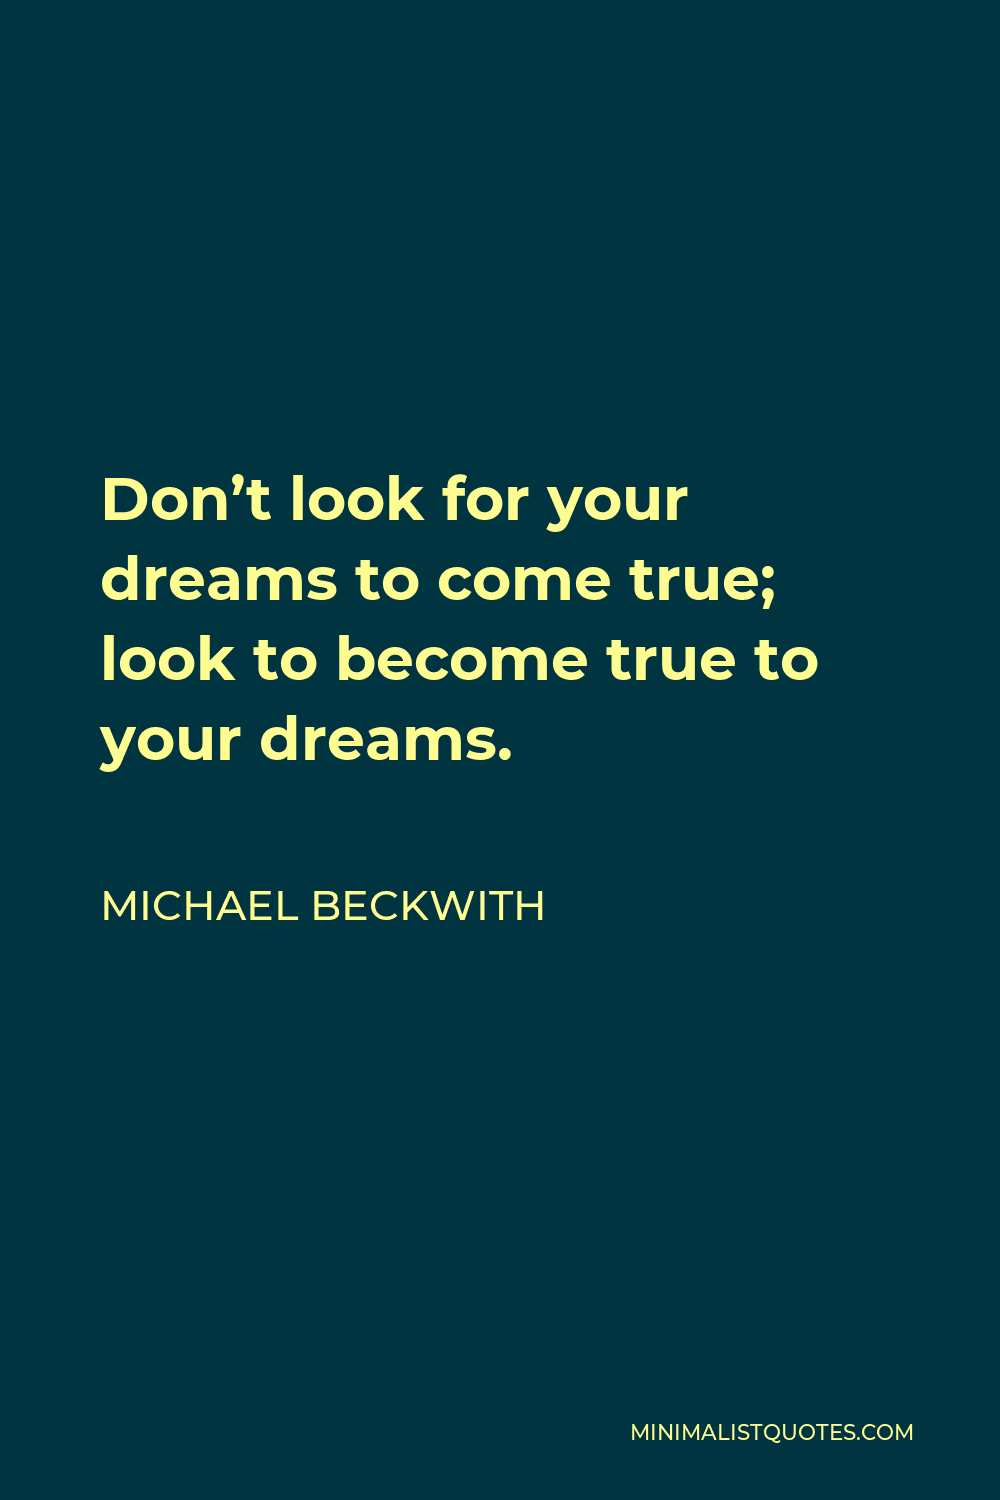 Michael Beckwith Quote - Don’t look for your dreams to come true; look to become true to your dreams.